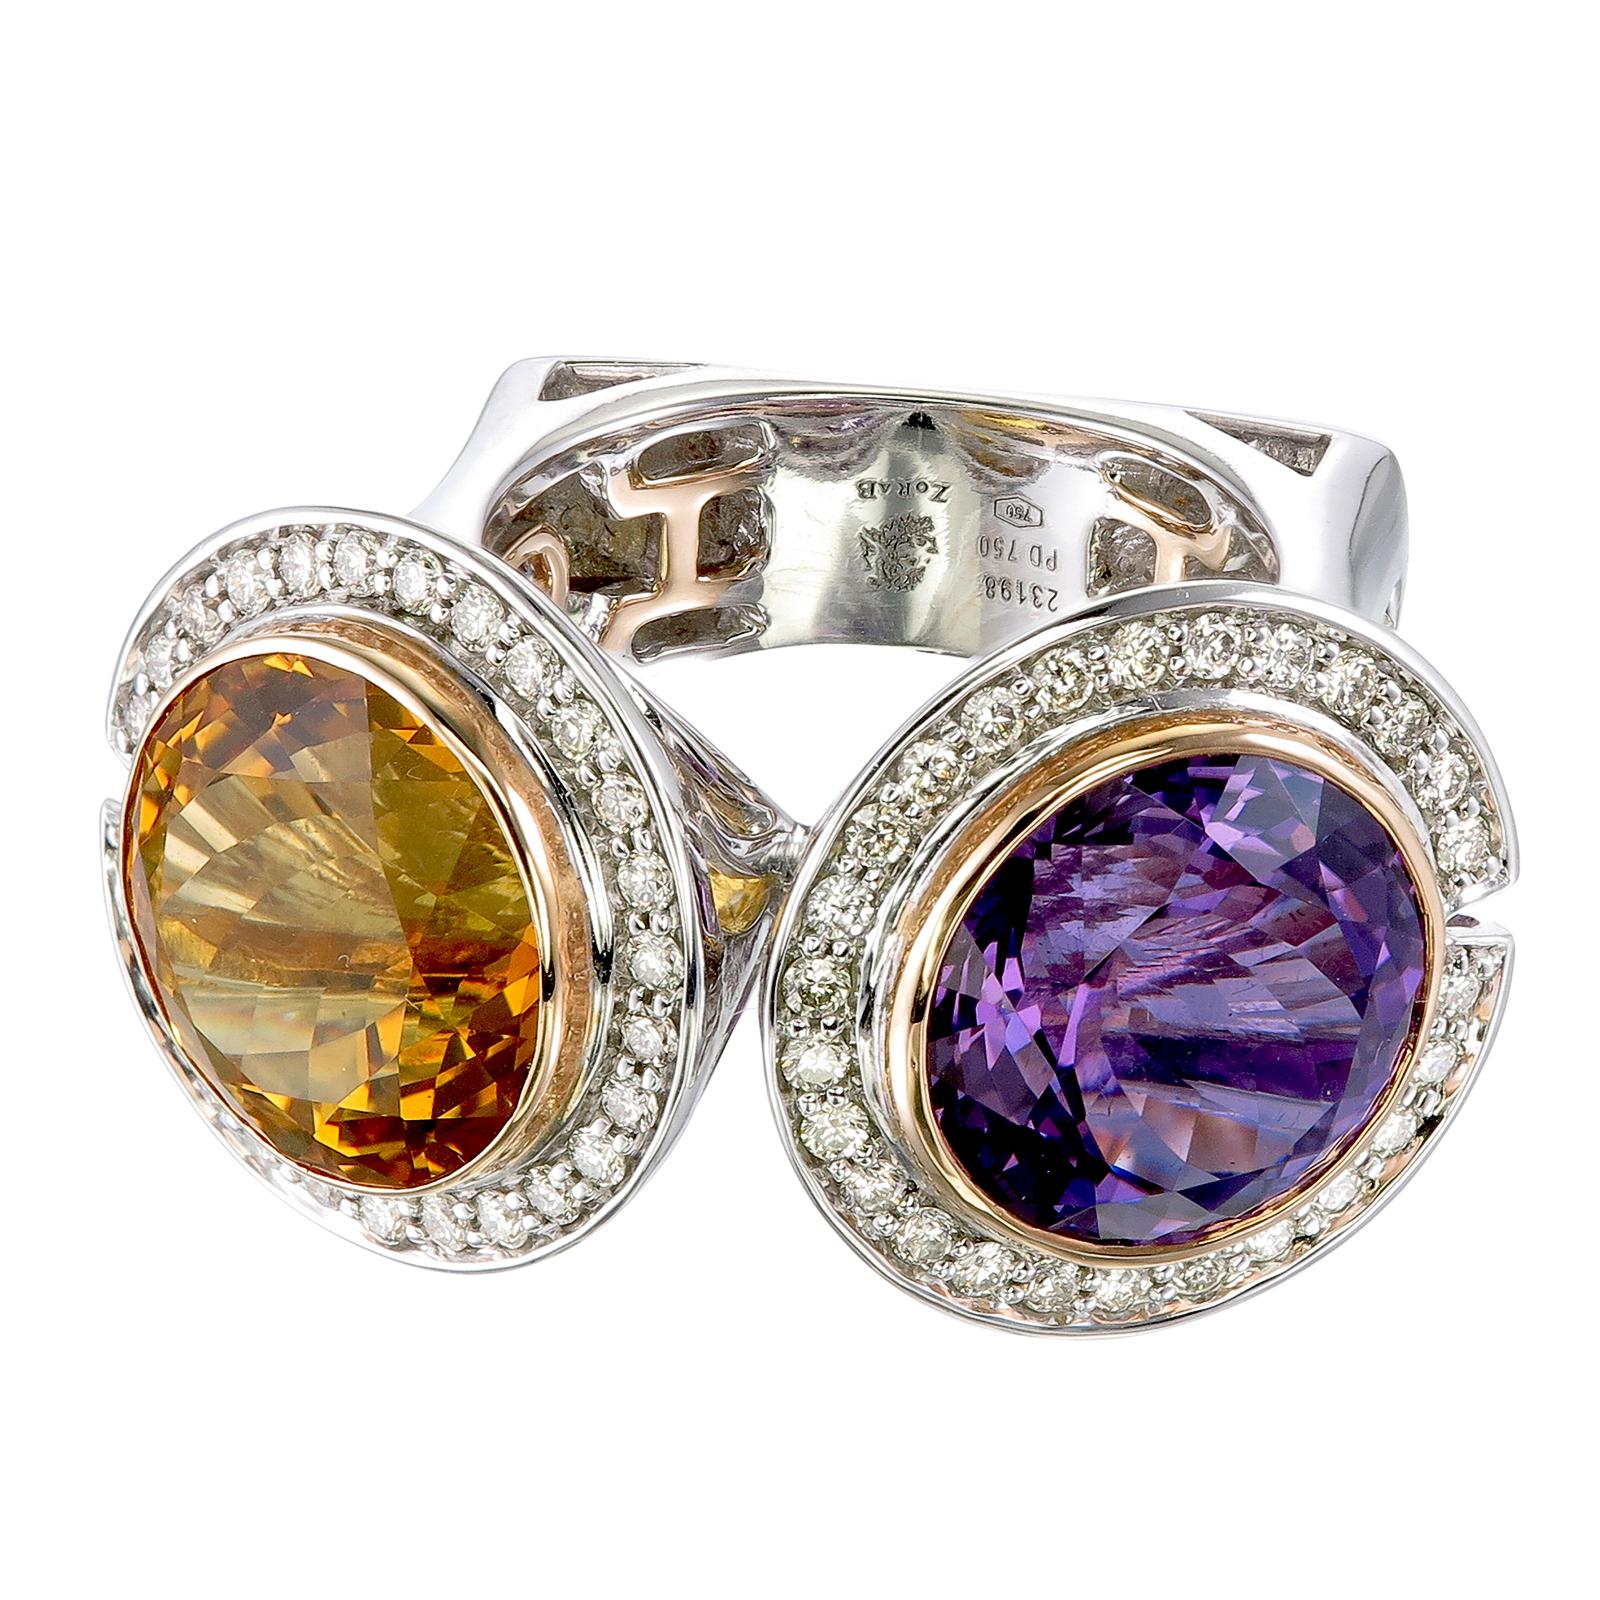 Citrine and amethyst never looked so good together as they do on this 18k gold and palladium ring. Both round cuts, the citrine weighs 7.52-carats while the amethyst weighs 8.43-carats. Together, the colors and shape complement one another